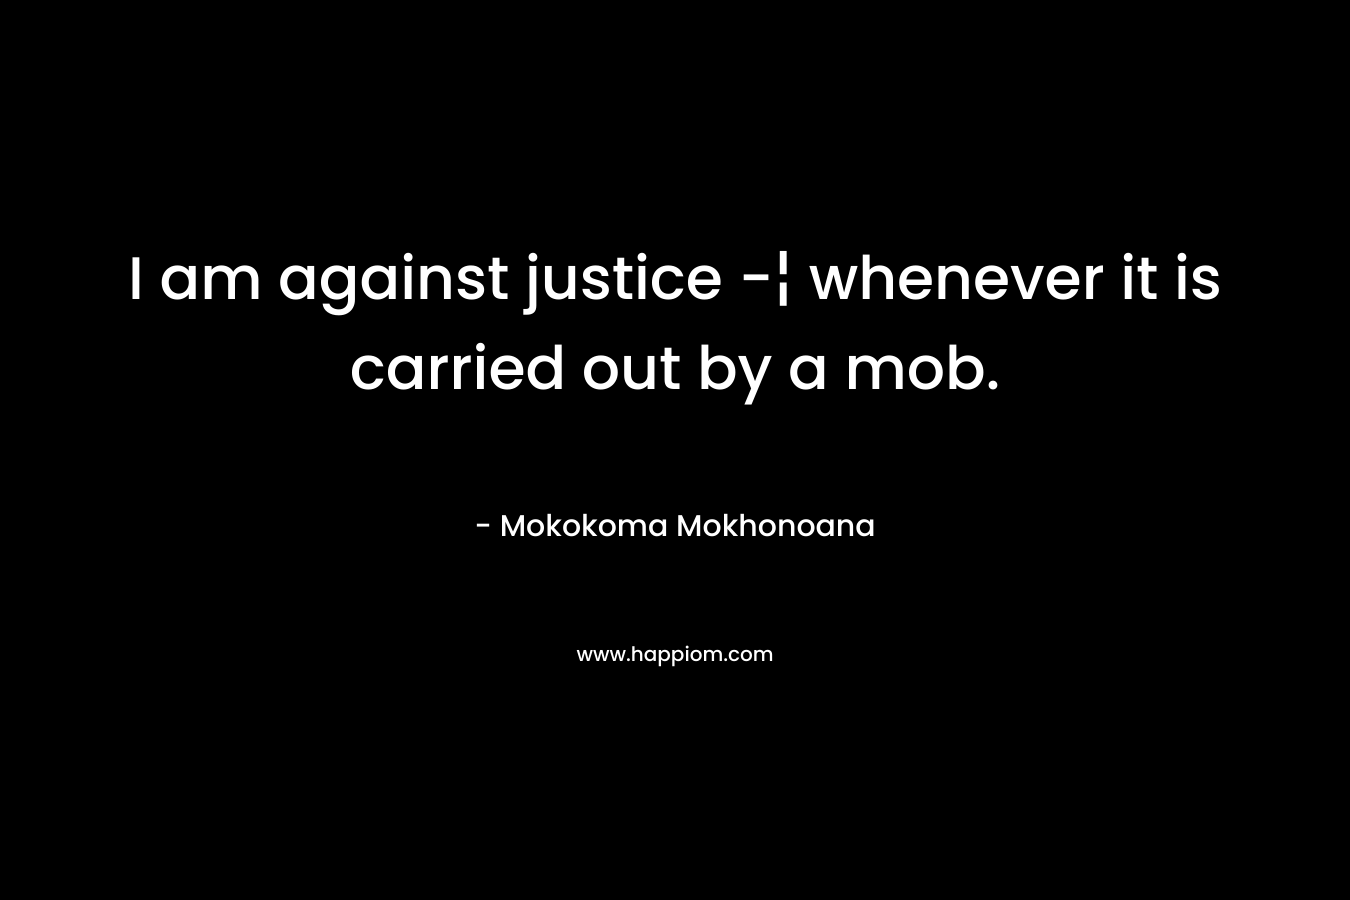 I am against justice -¦ whenever it is carried out by a mob. – Mokokoma Mokhonoana